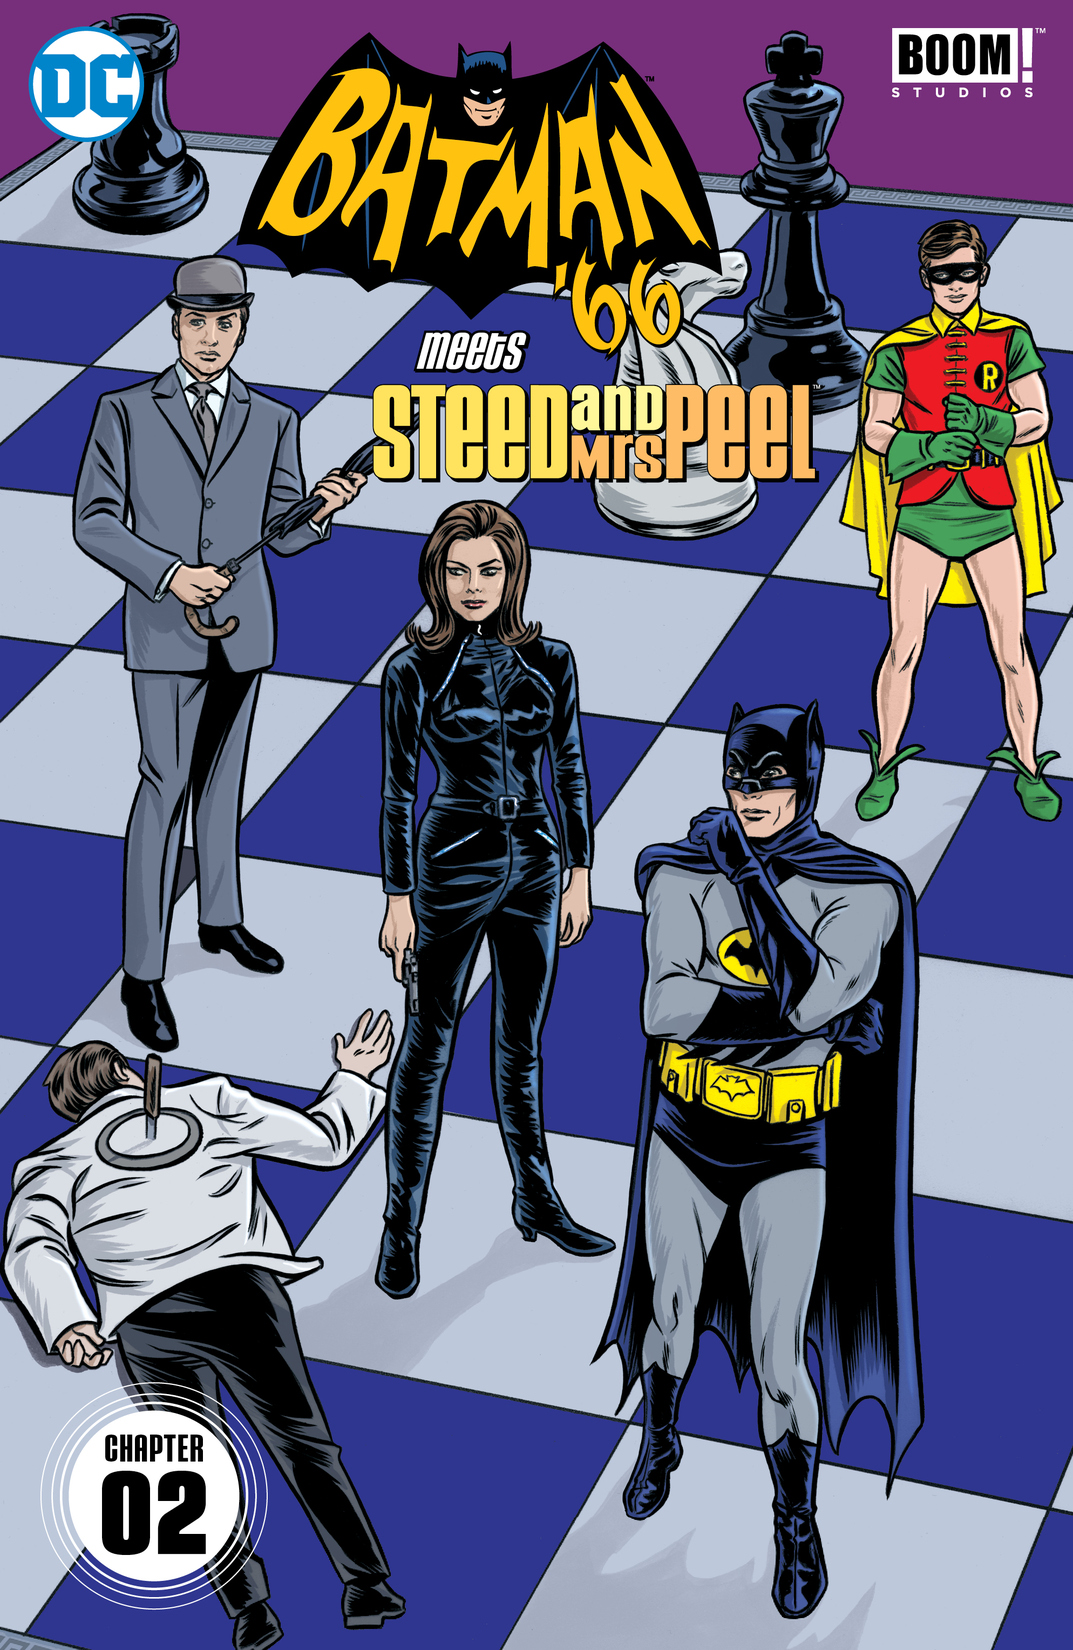 Batman '66 Meets Steed and Mrs Peel #2 preview images